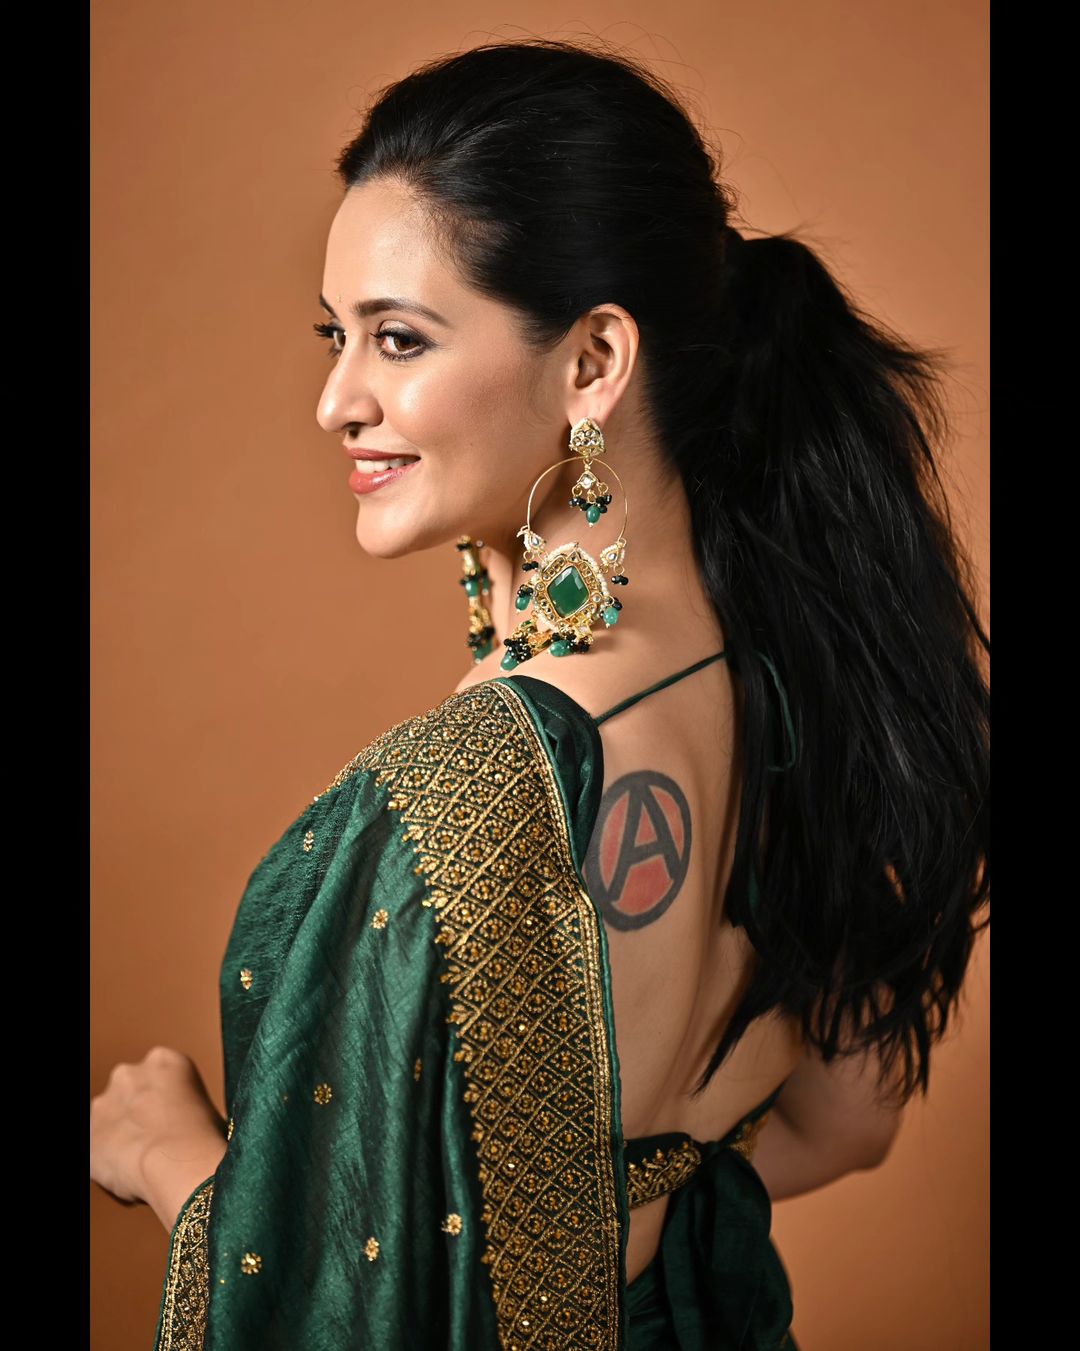 Actress priyanka sarkar slays with this gorgeous pictures-Priyanka Sarkar, Priyankasarkar Photos,Spicy Hot Pics,Images,High Resolution WallPapers Download